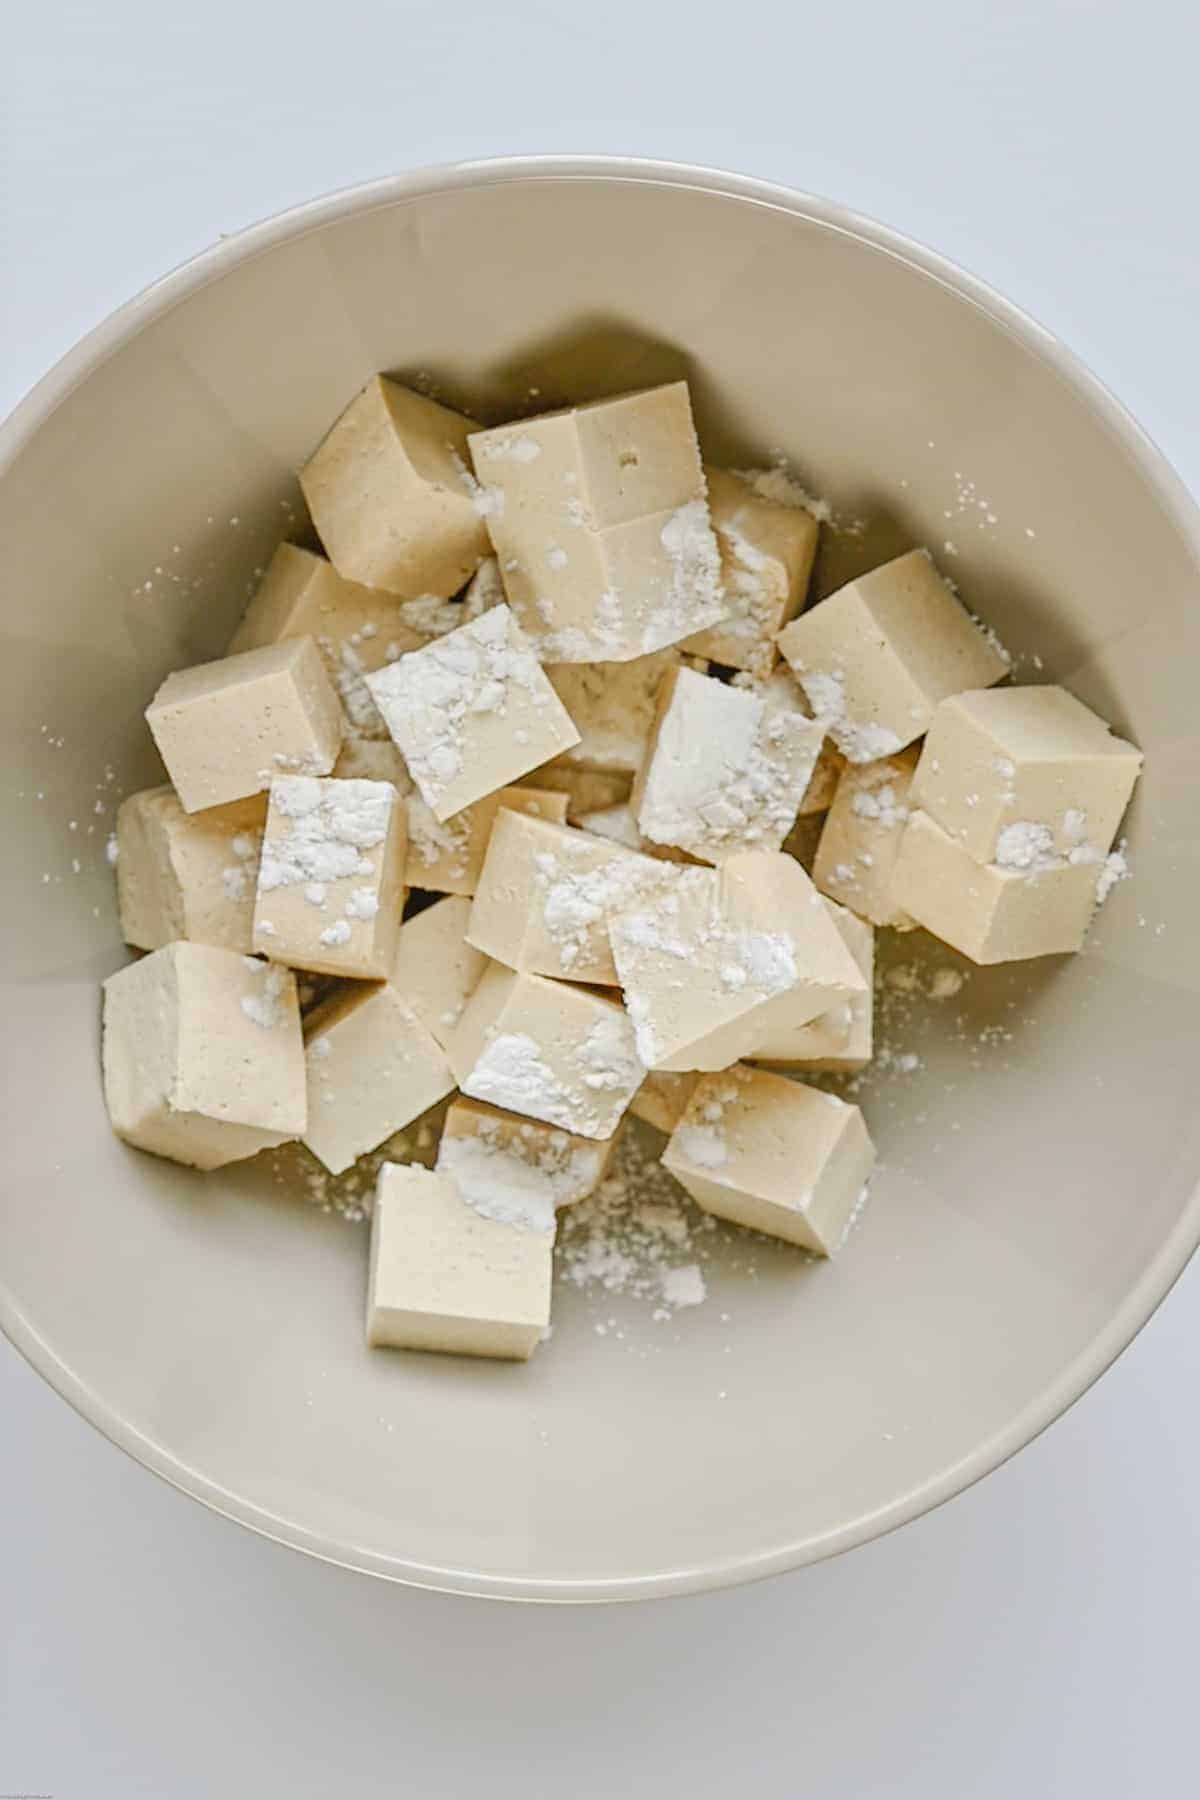 Cubed tofu in a bowl with cornstarch.